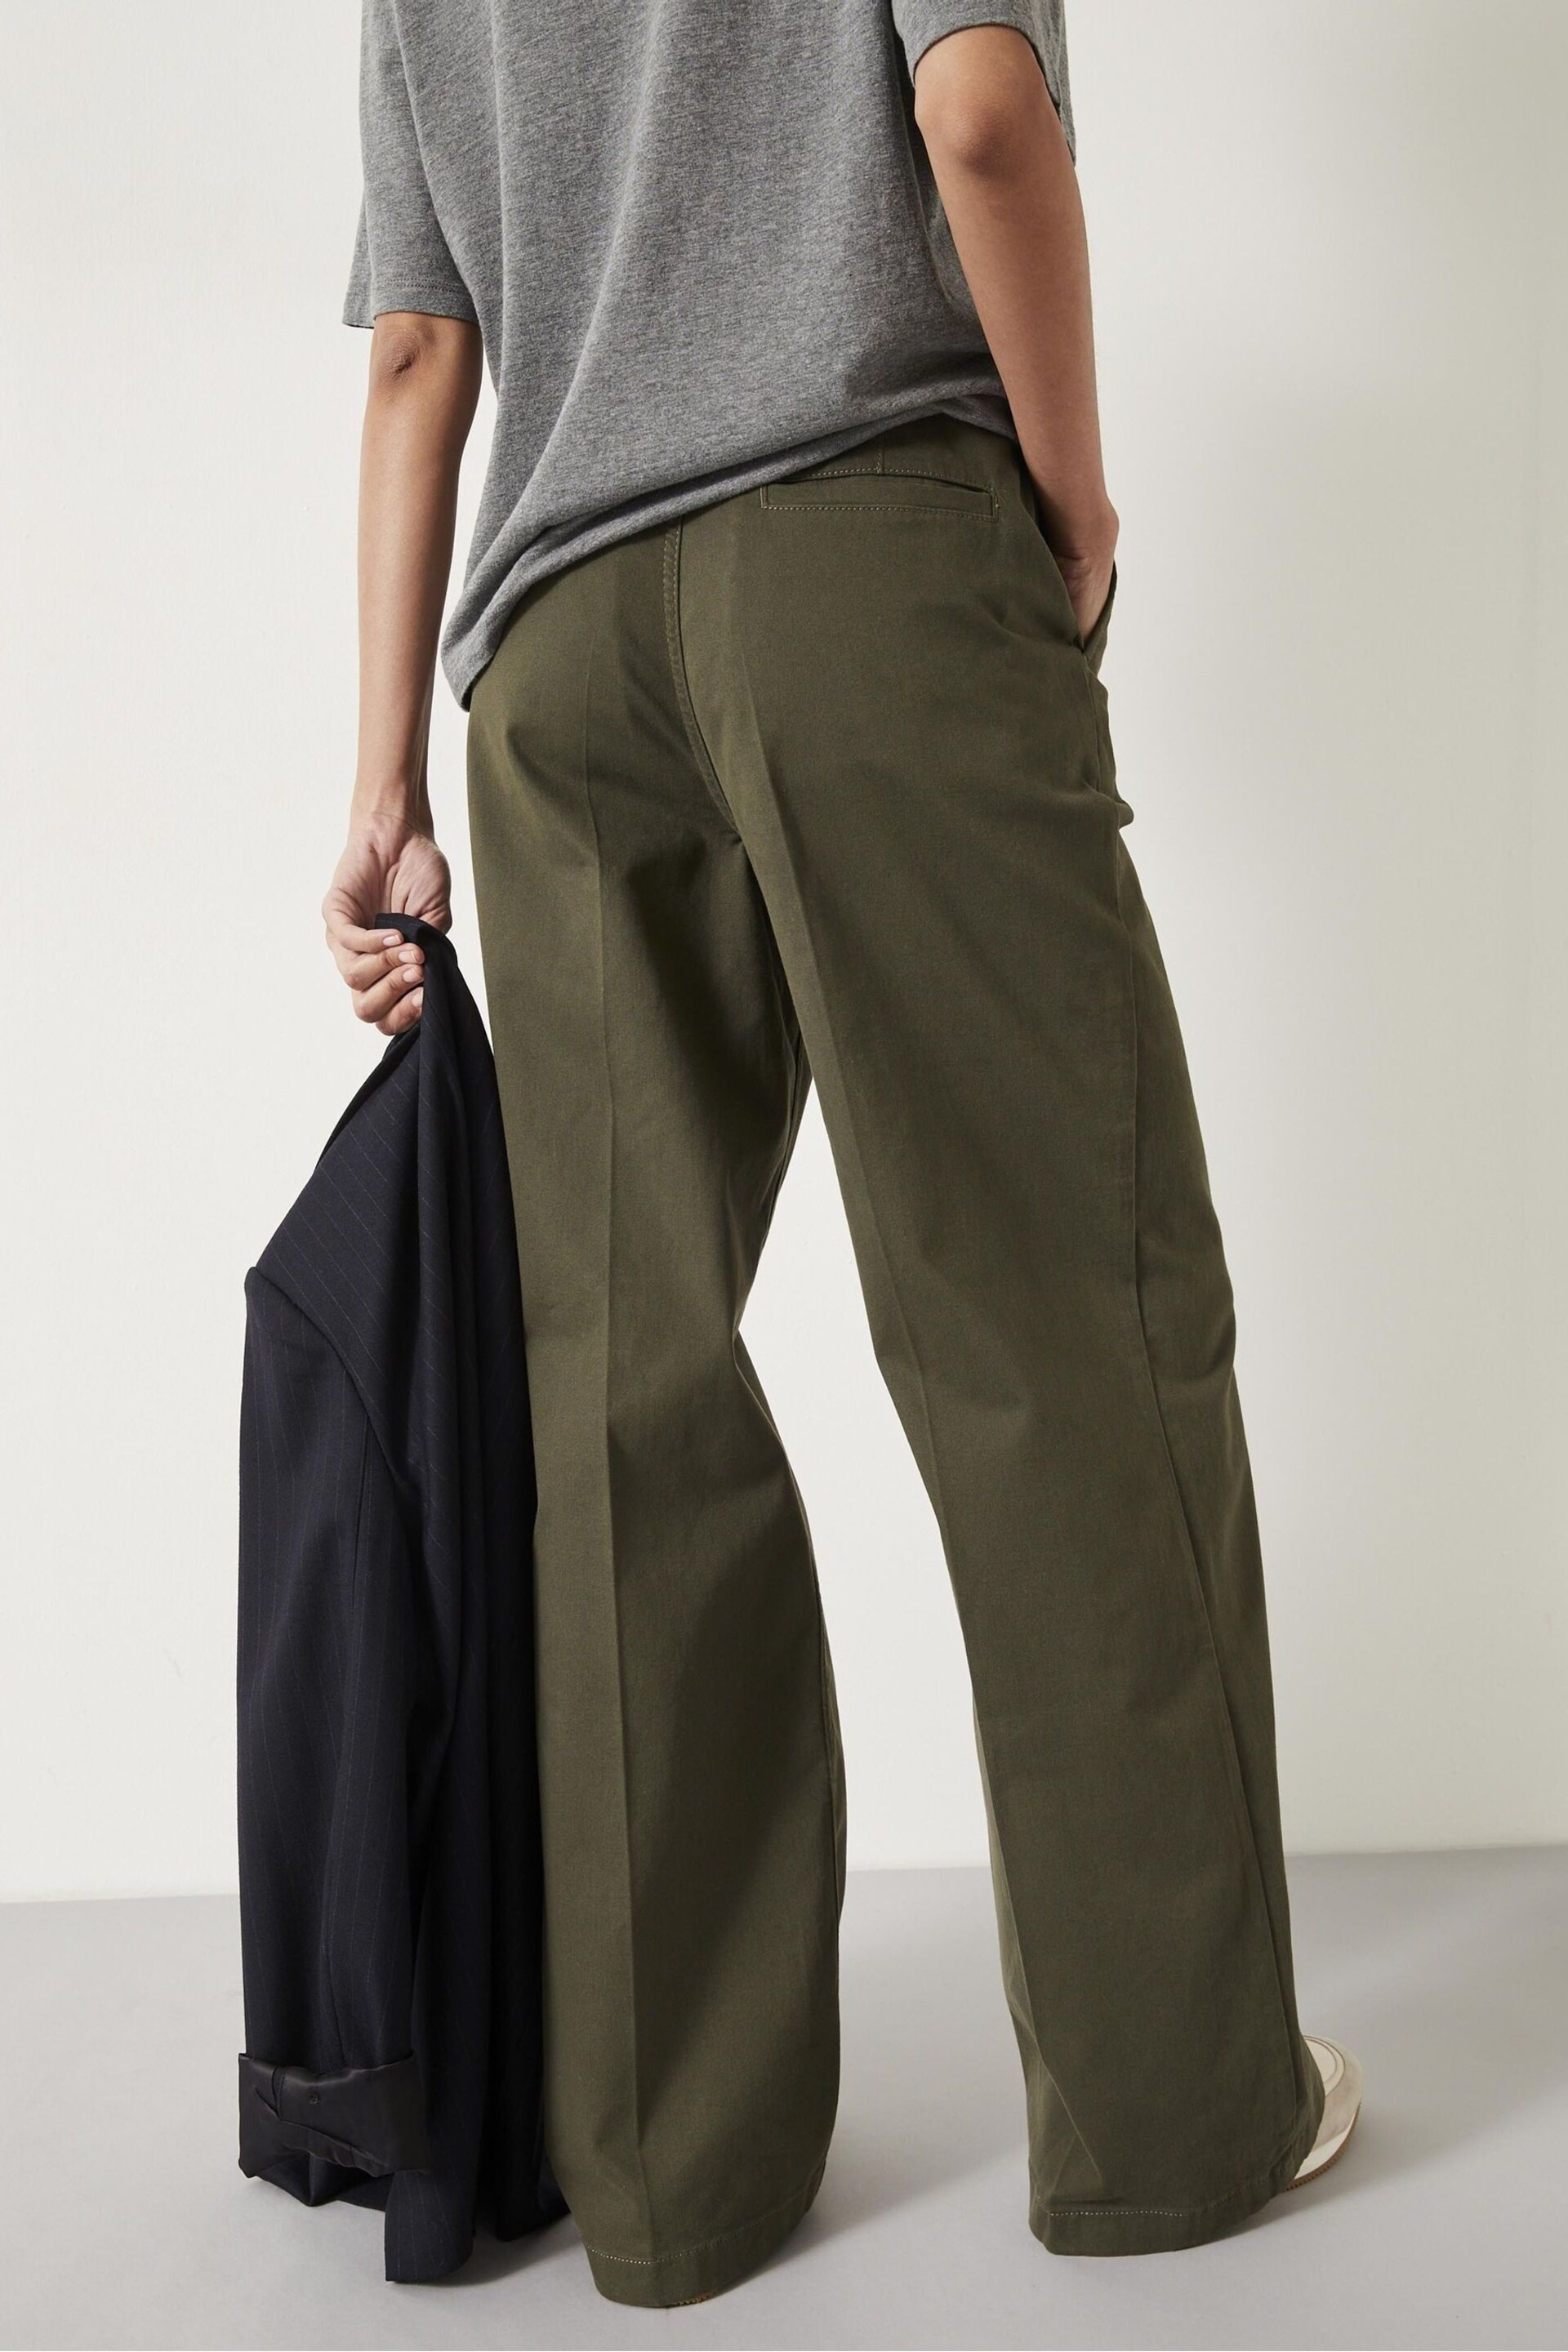 Hush Green Camille Flat Front Cotton Trousers - Image 2 of 5